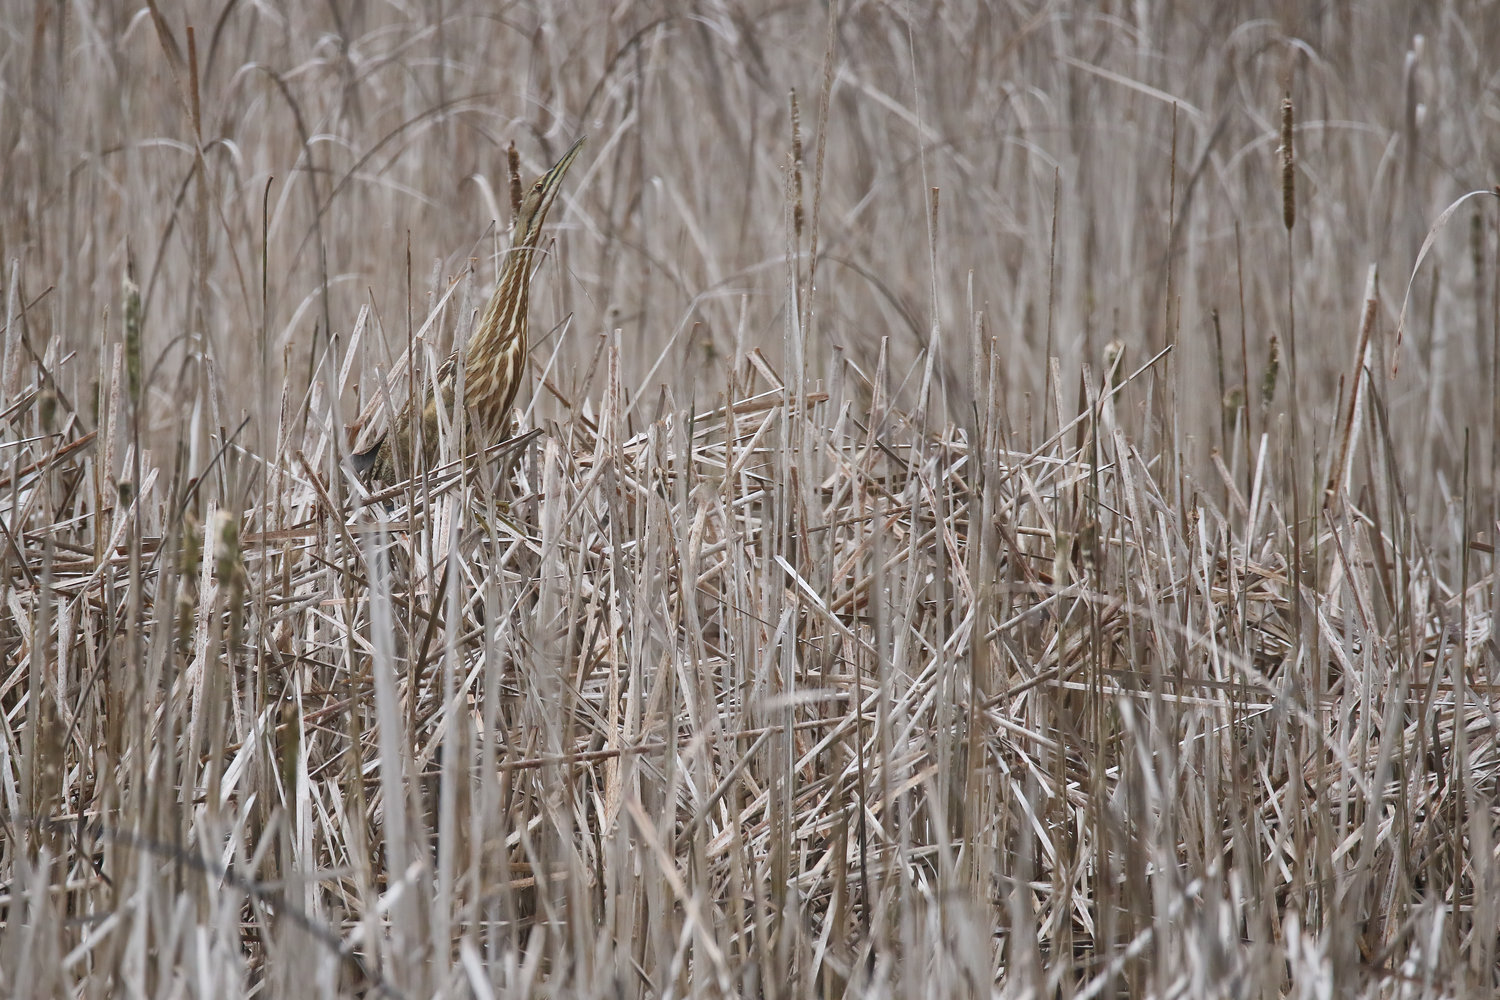 The American Bittern, with its brown and white vertical stripes, hides in the reeds waiting for its prey to come close.